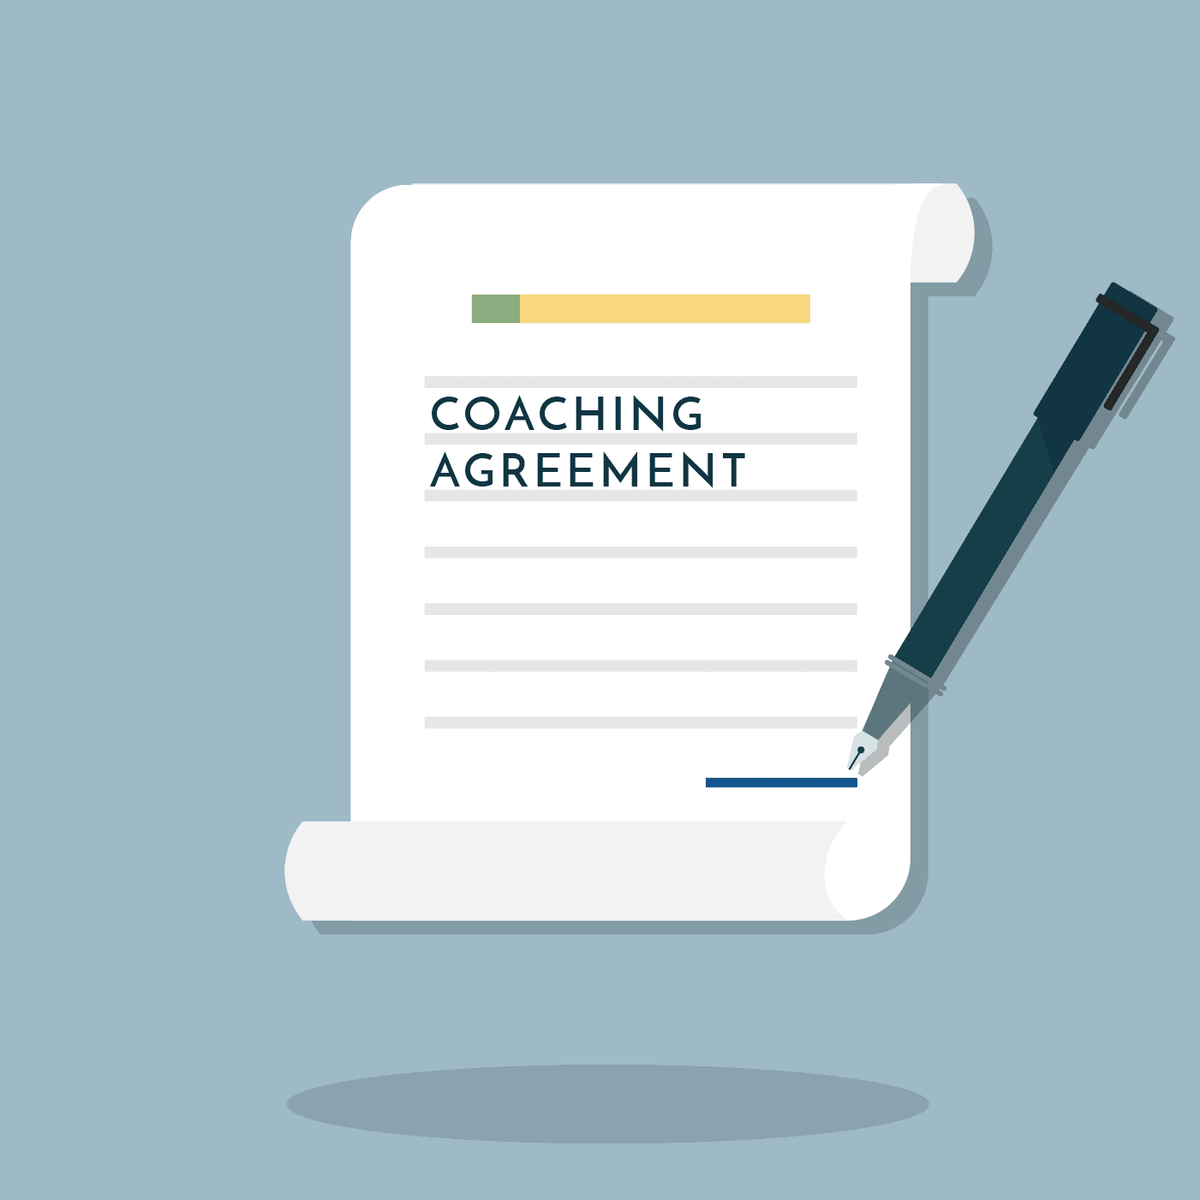 One-on-One Coaching Services Agreement